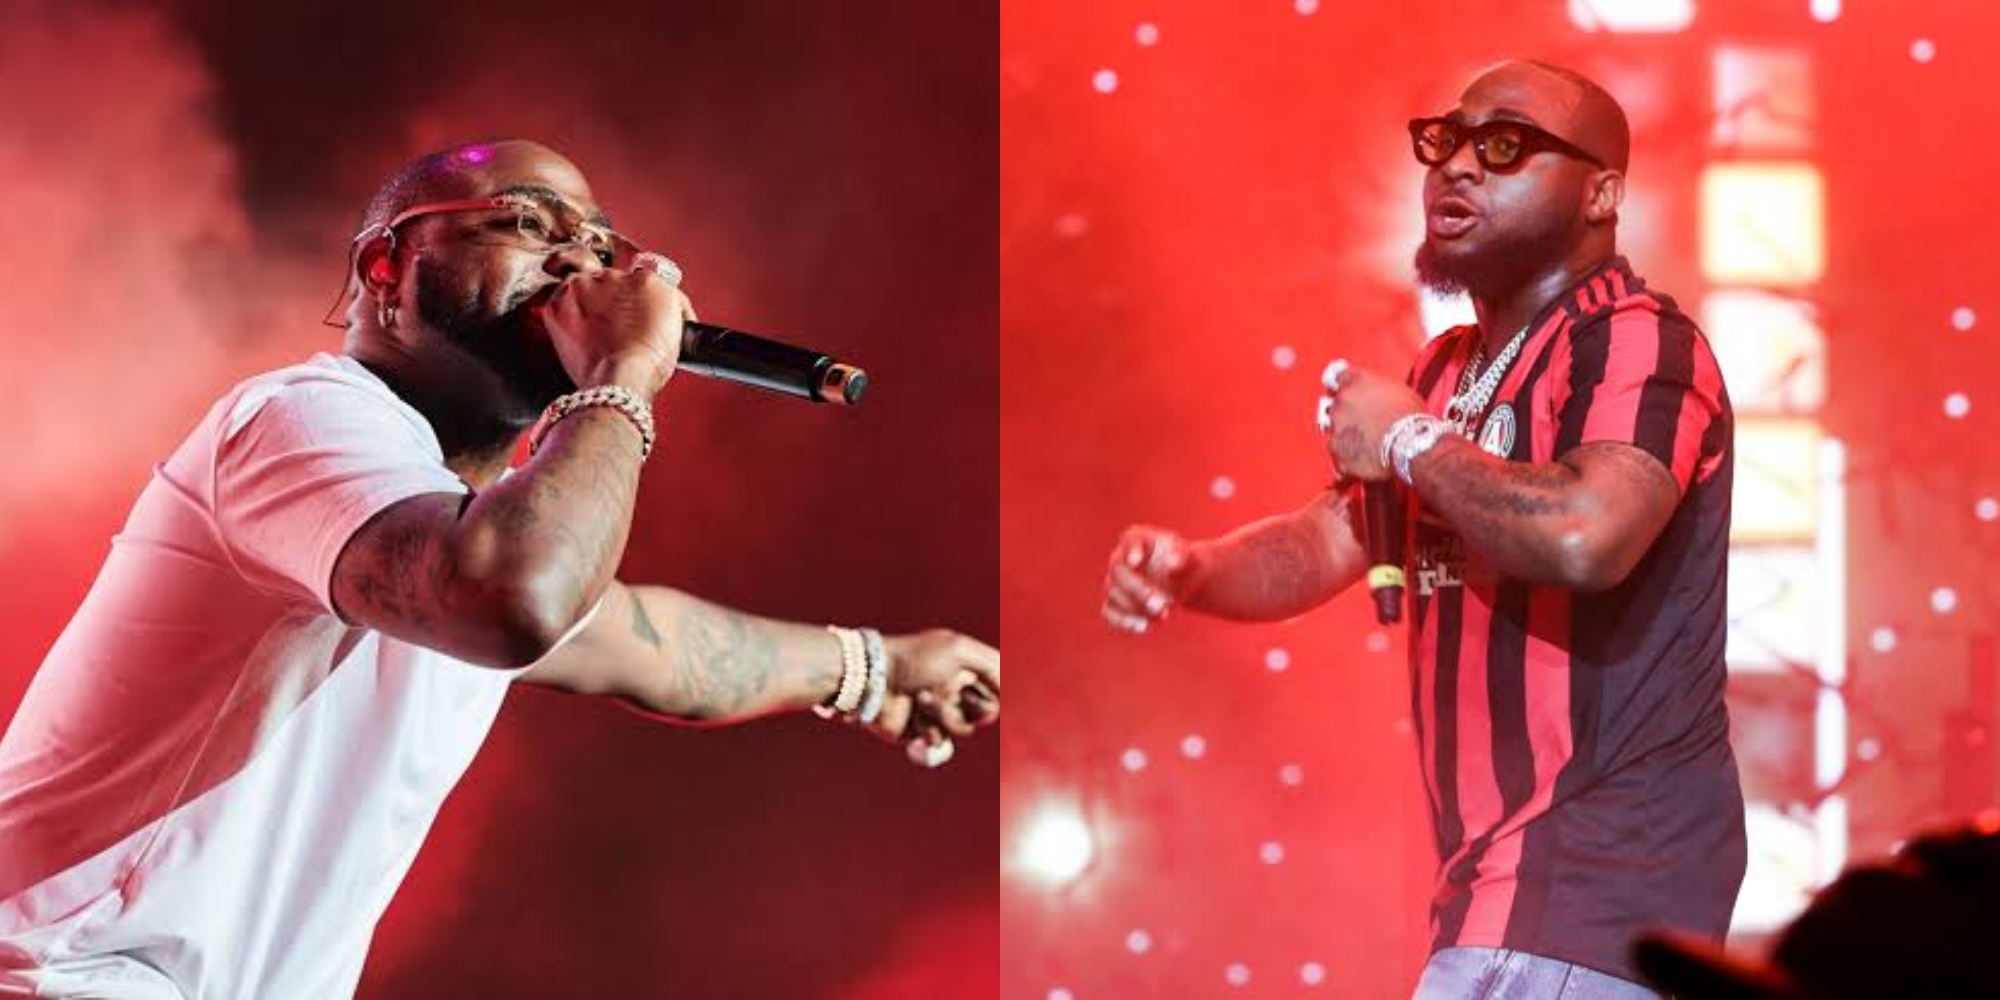 Davido almost throws punch at fan rushing towards him onstage at "Timeless" concert